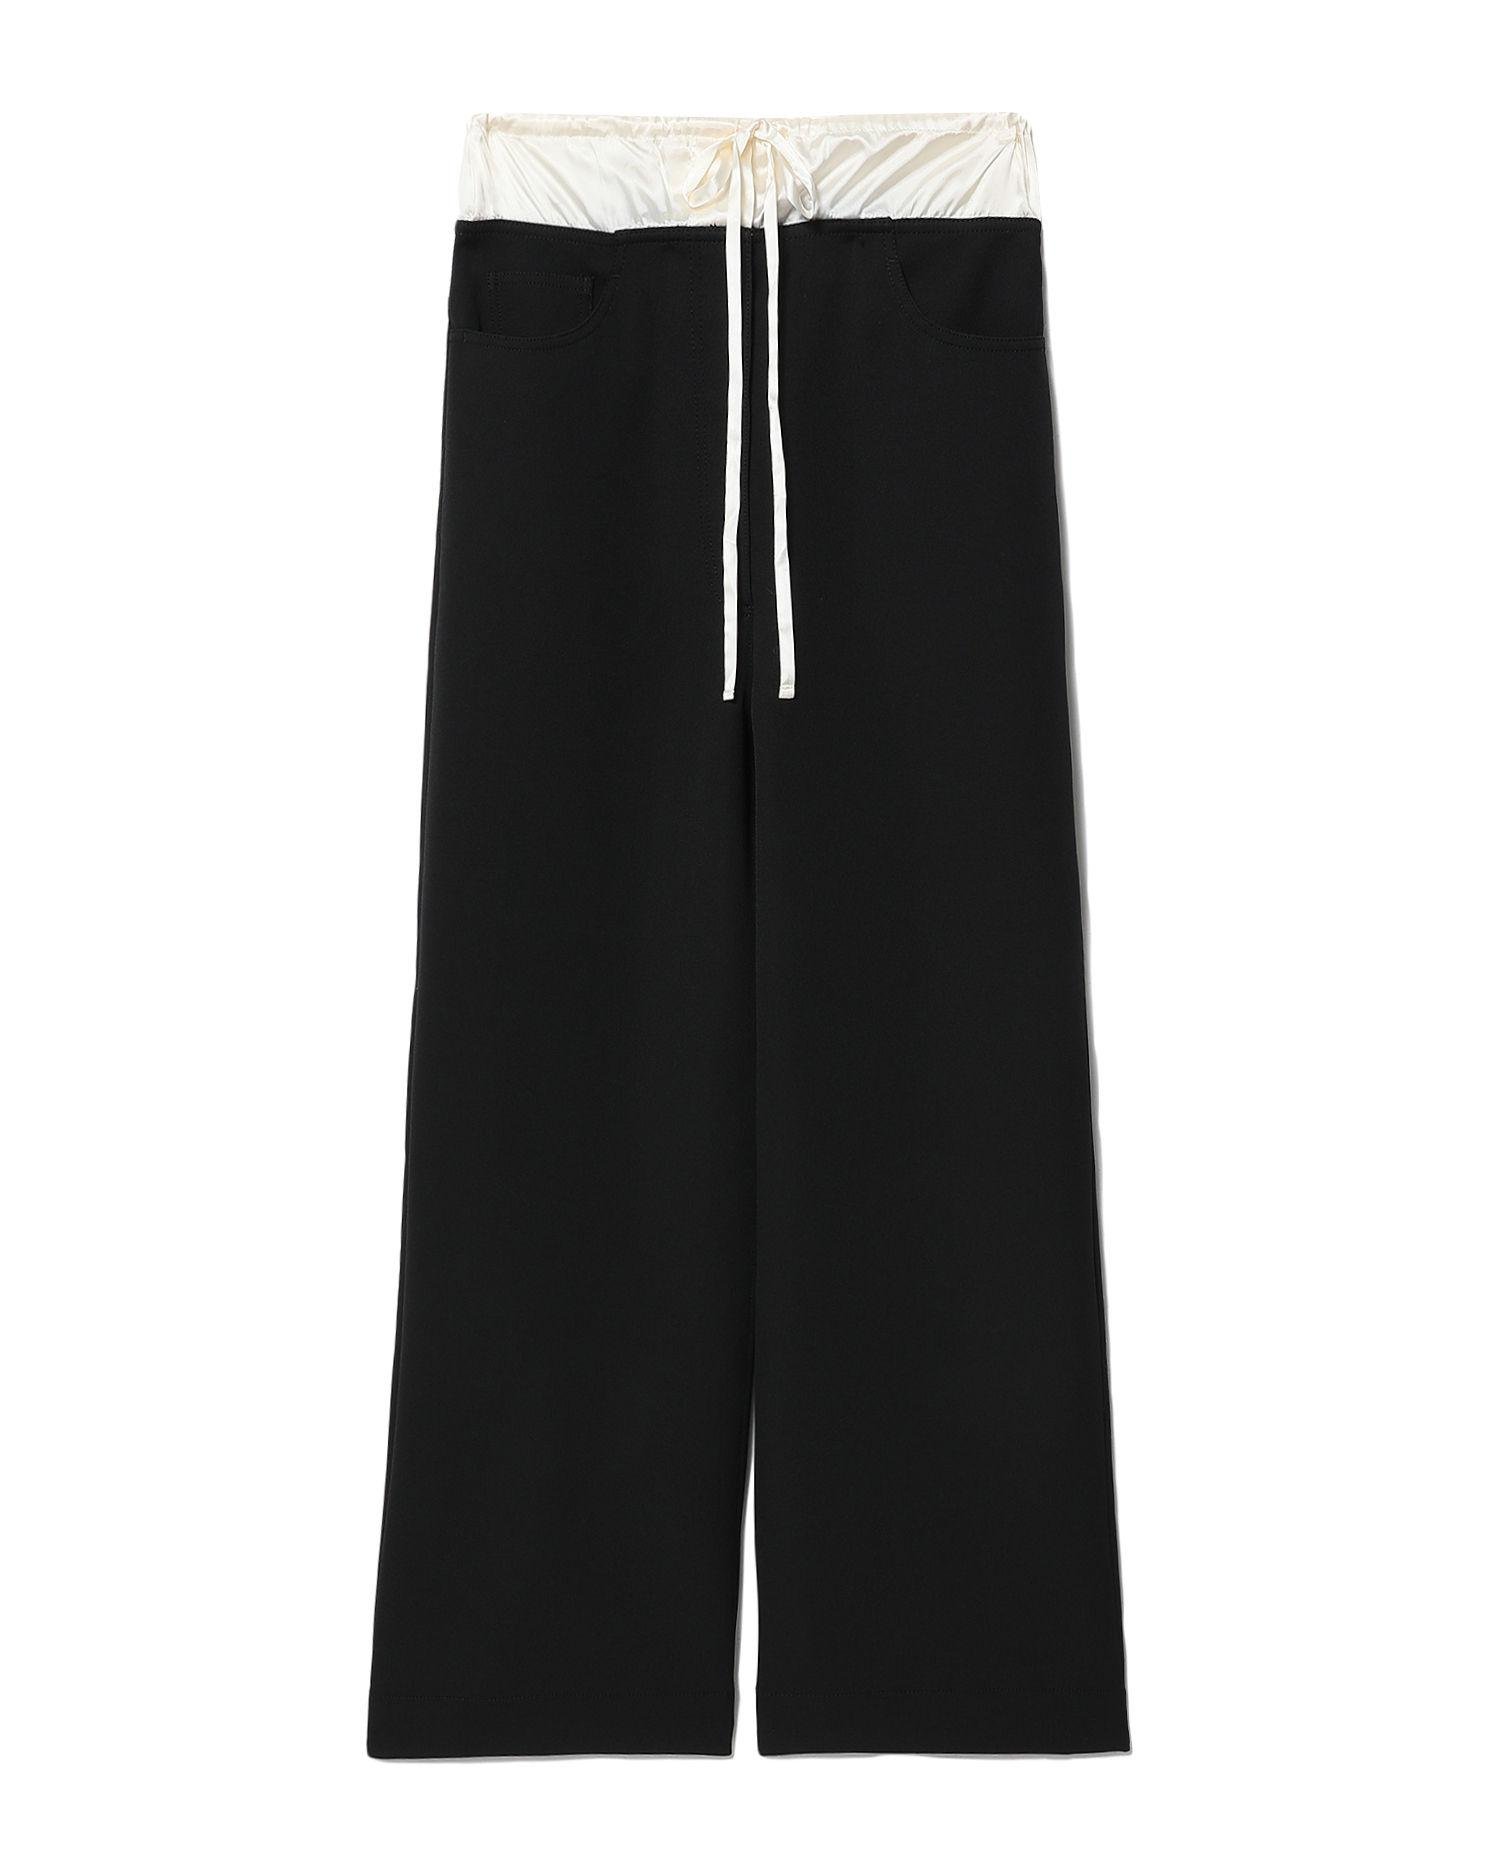 Satin contrast trousers by ACNE STUDIOS